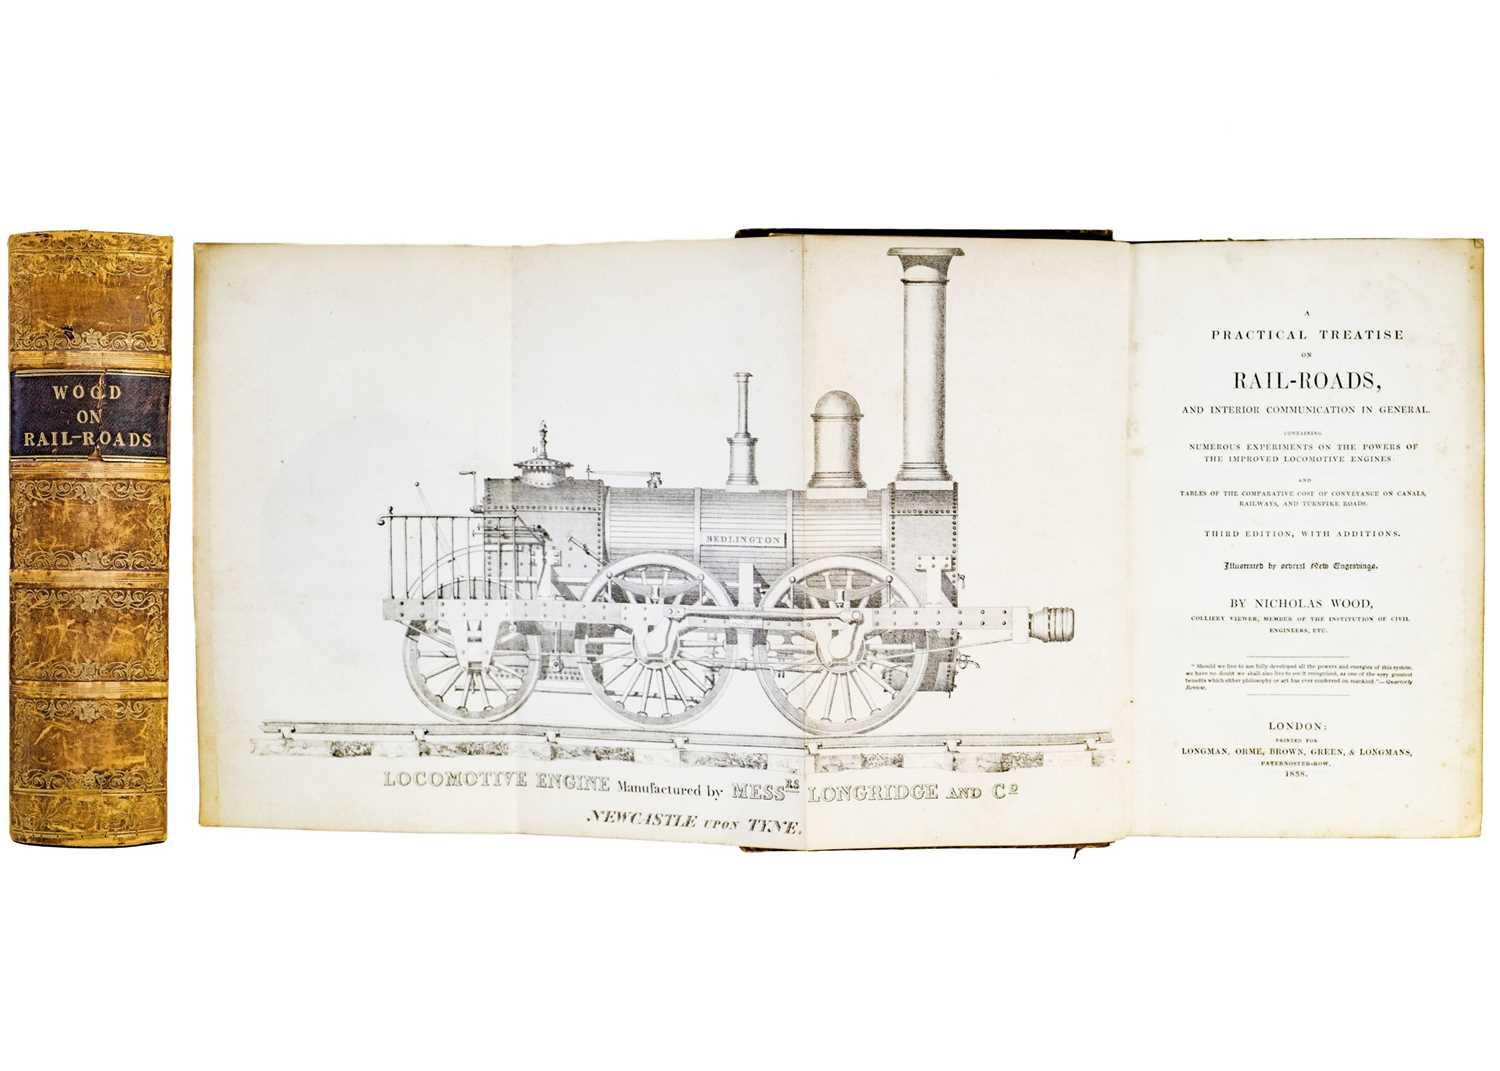 WOOD, Nicholas. 'A Practical Treatise on Rail-Roads, and Interior Communication in General,'